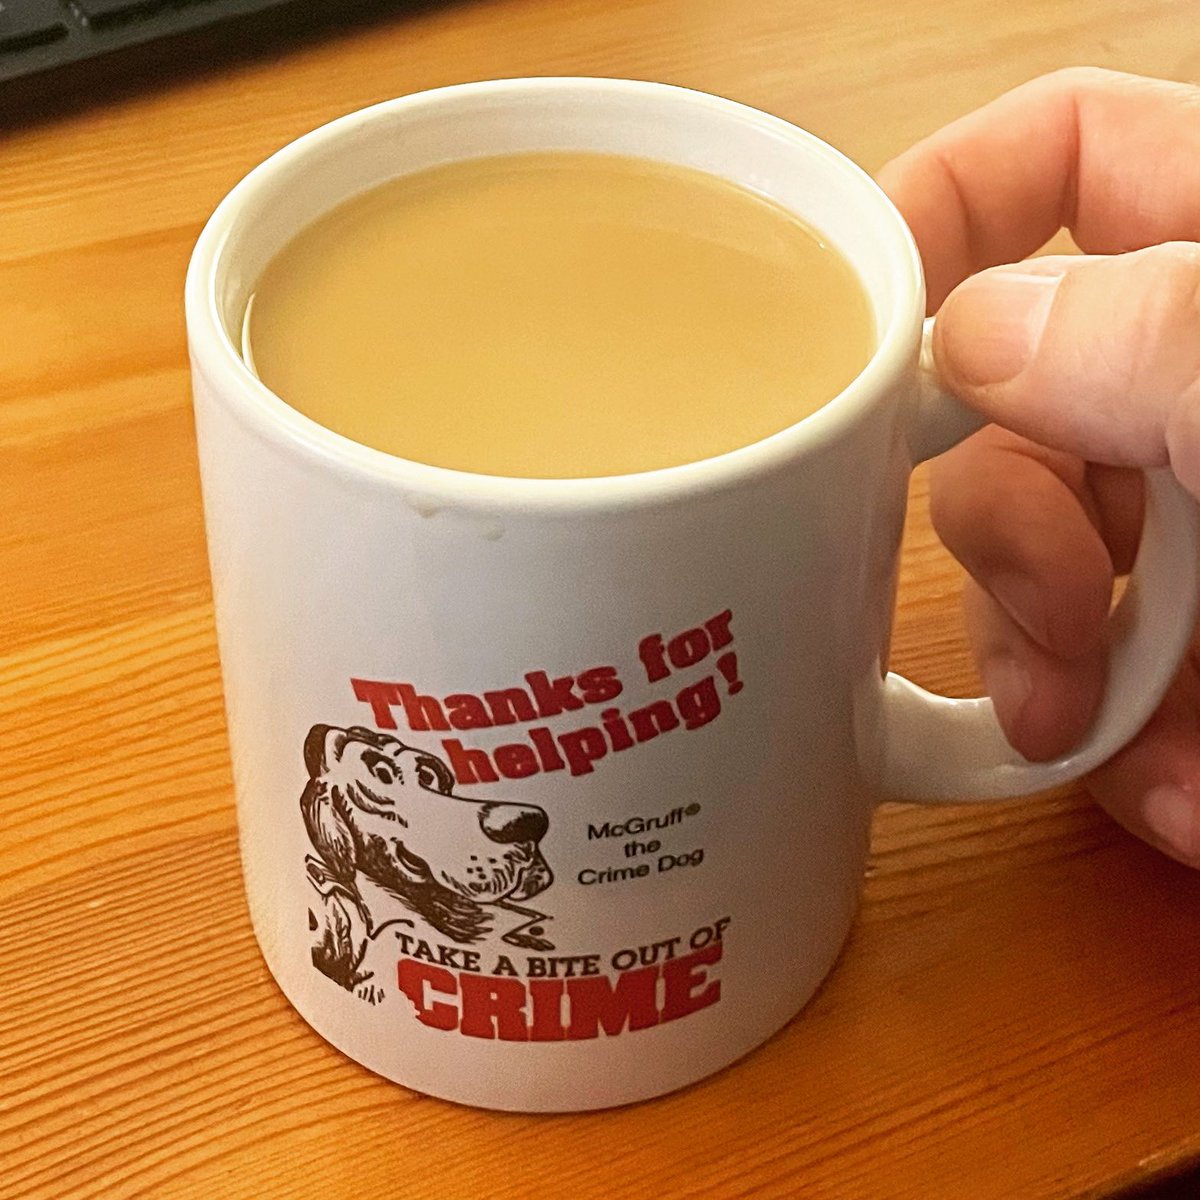 A vintage cup of joe is a great way to start the day…by the way, raise your hand if you grew up with McGruff the Crime Dog 😉🐾🔍 #coffee #coffeemug #vintagecoffeemug #mcgruff #mcgruffthecrimedog #takeabiteoutofcrime